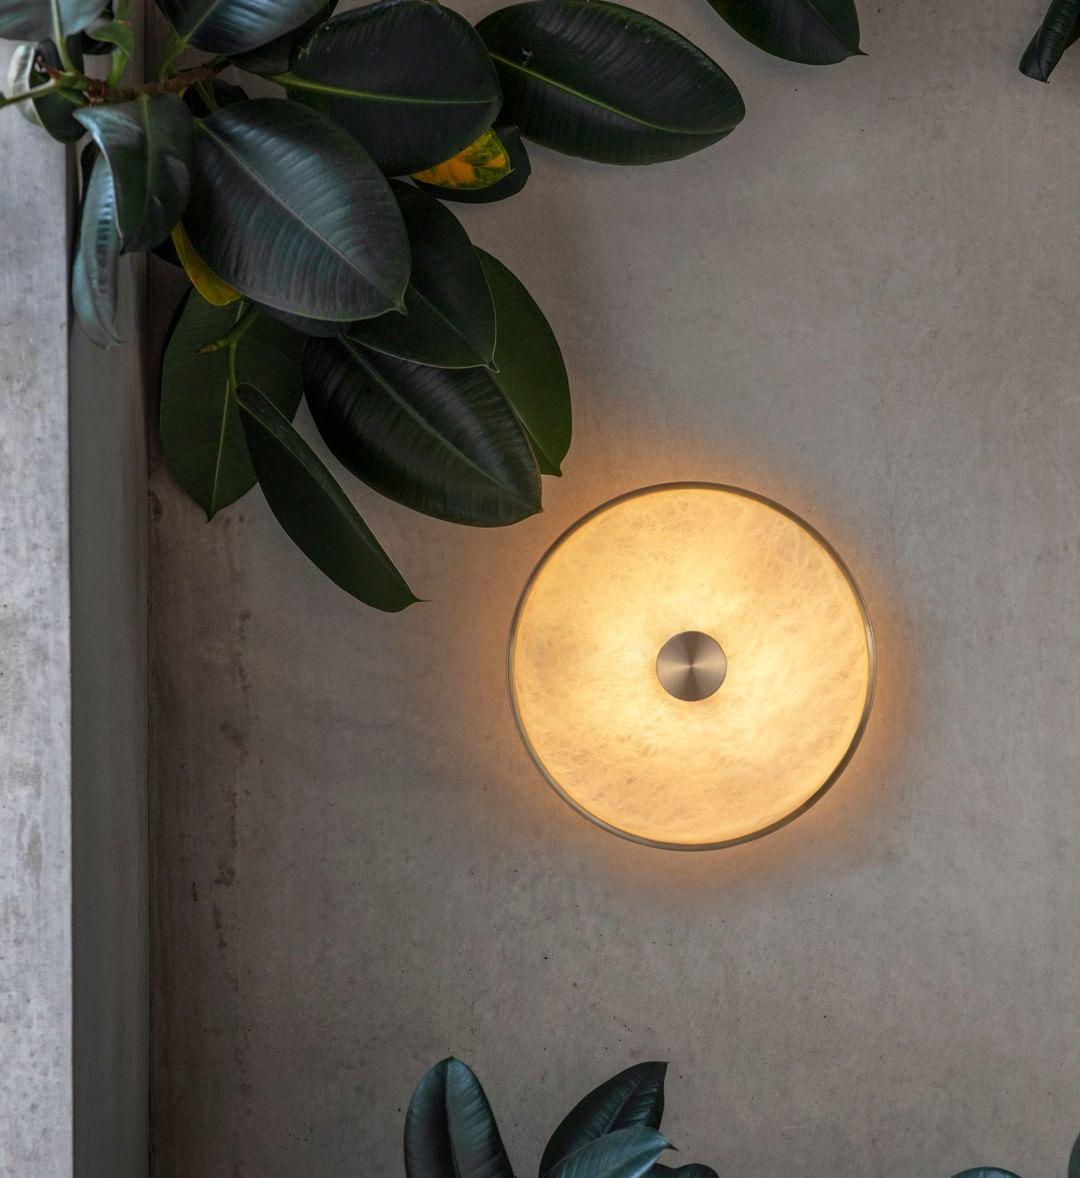 Bide small wall light by Bert Frank
Dimensions: H 26 x D 6.2 cm
Materials: Brass, alabaster

Available finishes: Brass, alabaster
All our lamps can be wired according to each country. If sold to the USA it will be wired for the USA for